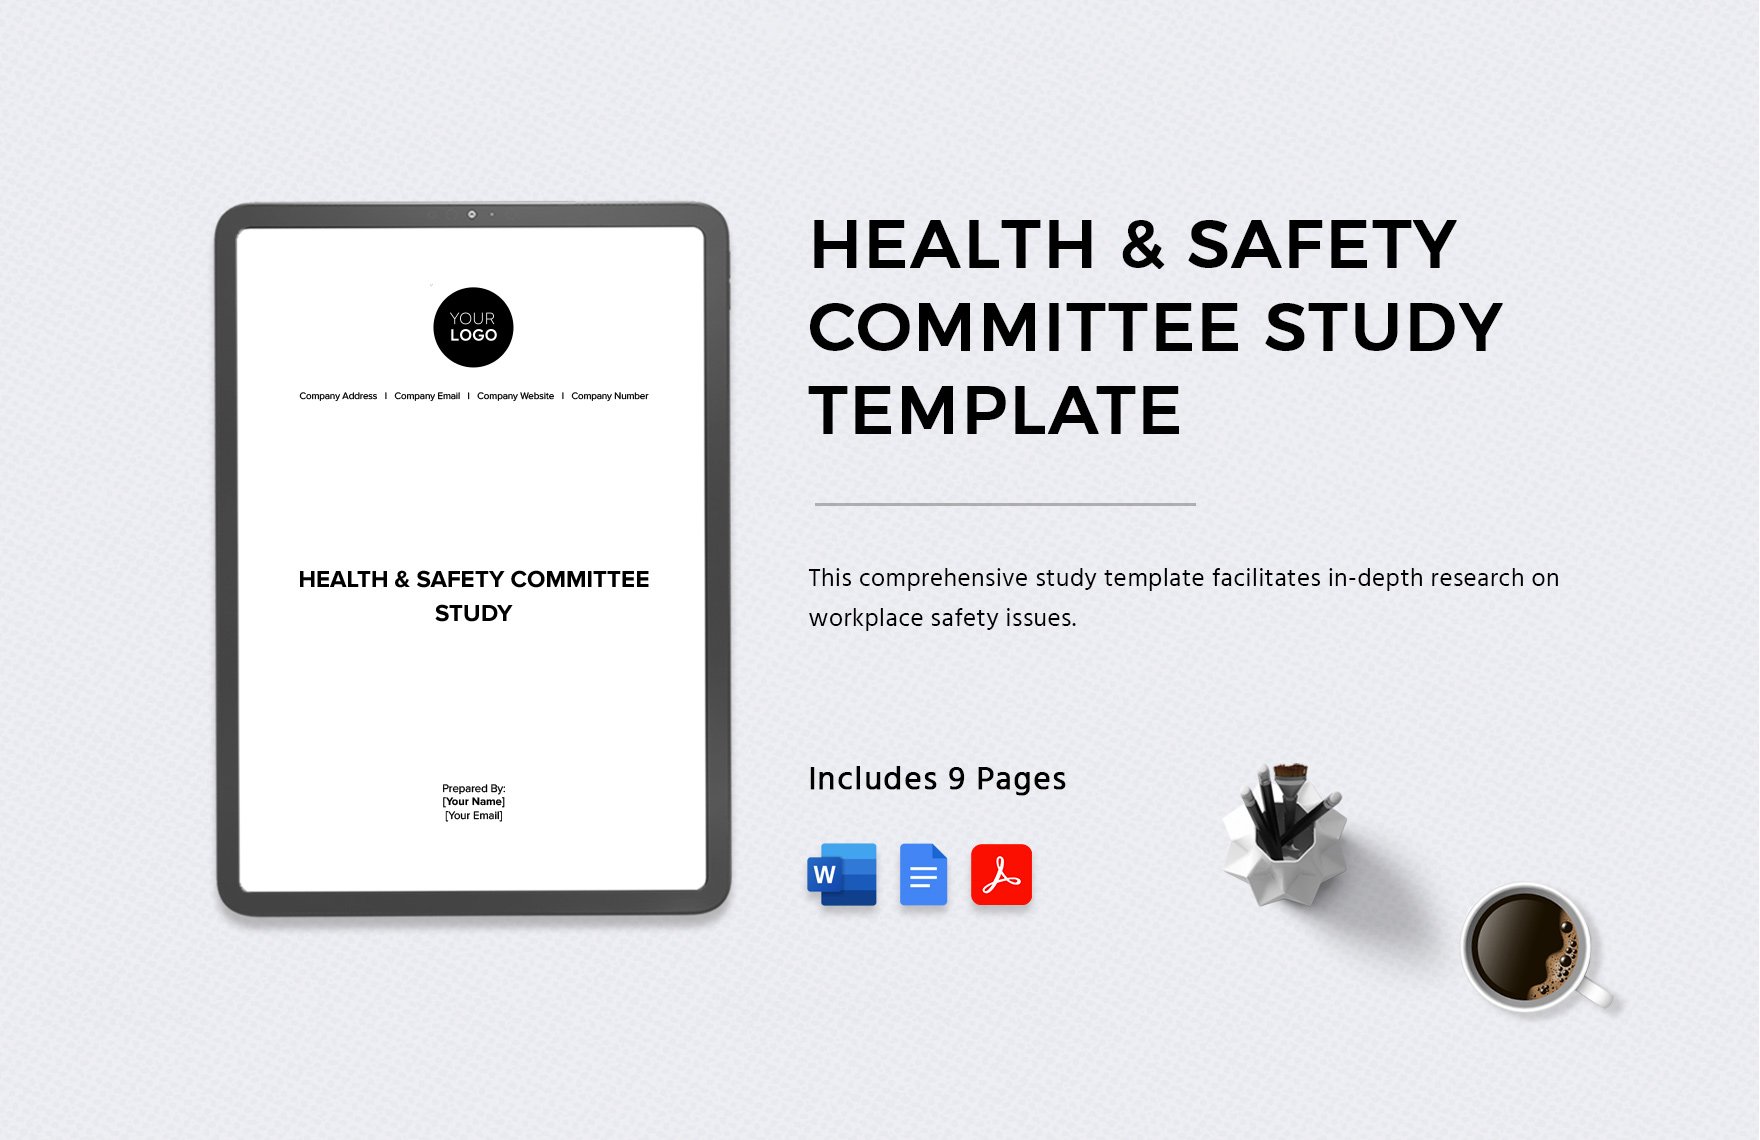 Health & Safety Committee Study Template